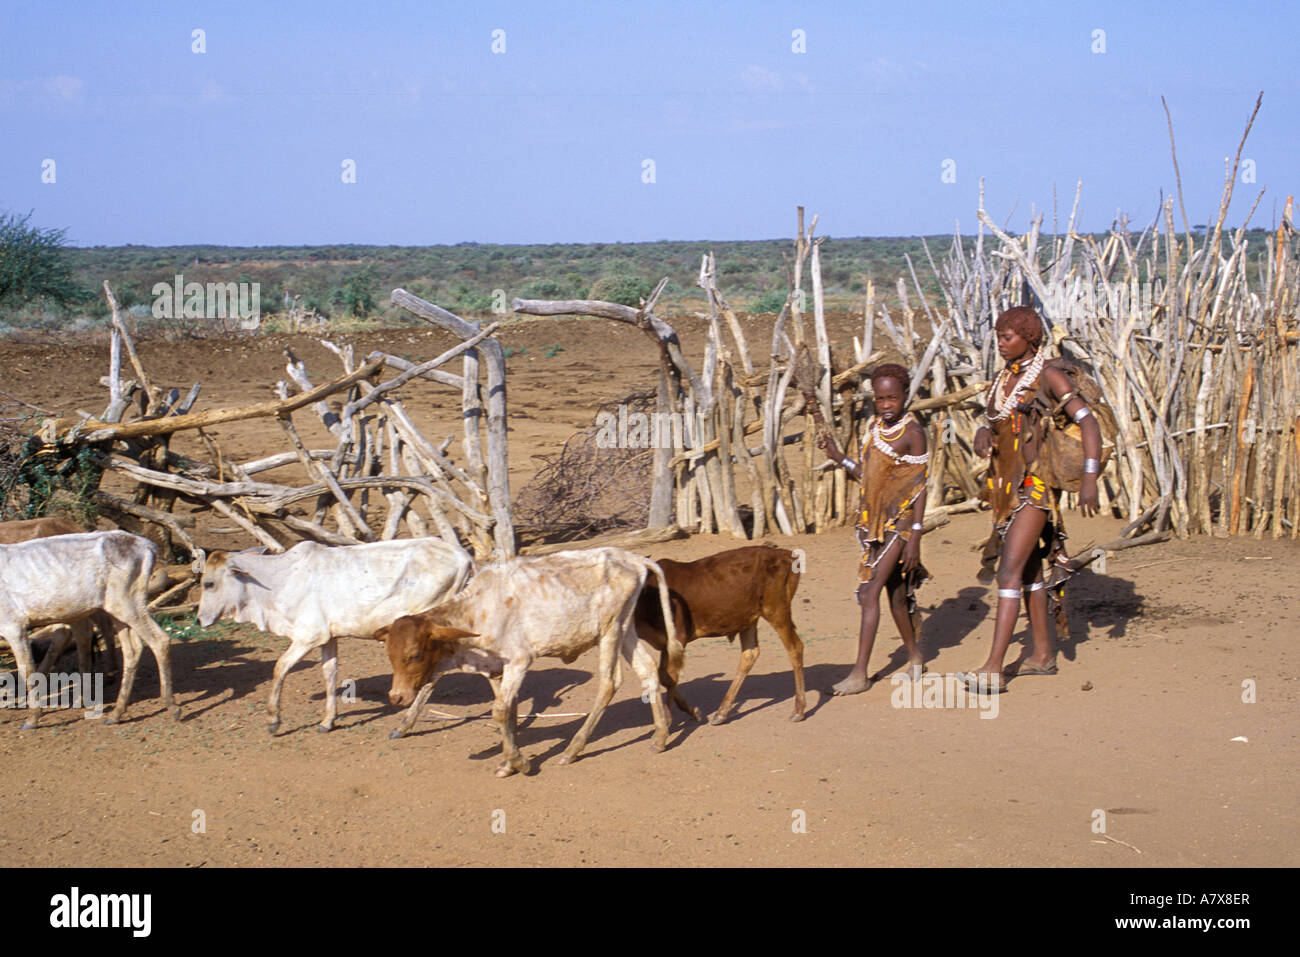 Two Hamar youth walk with some cattle, in Ethiopia's Omo region, Africa. Stock Photo